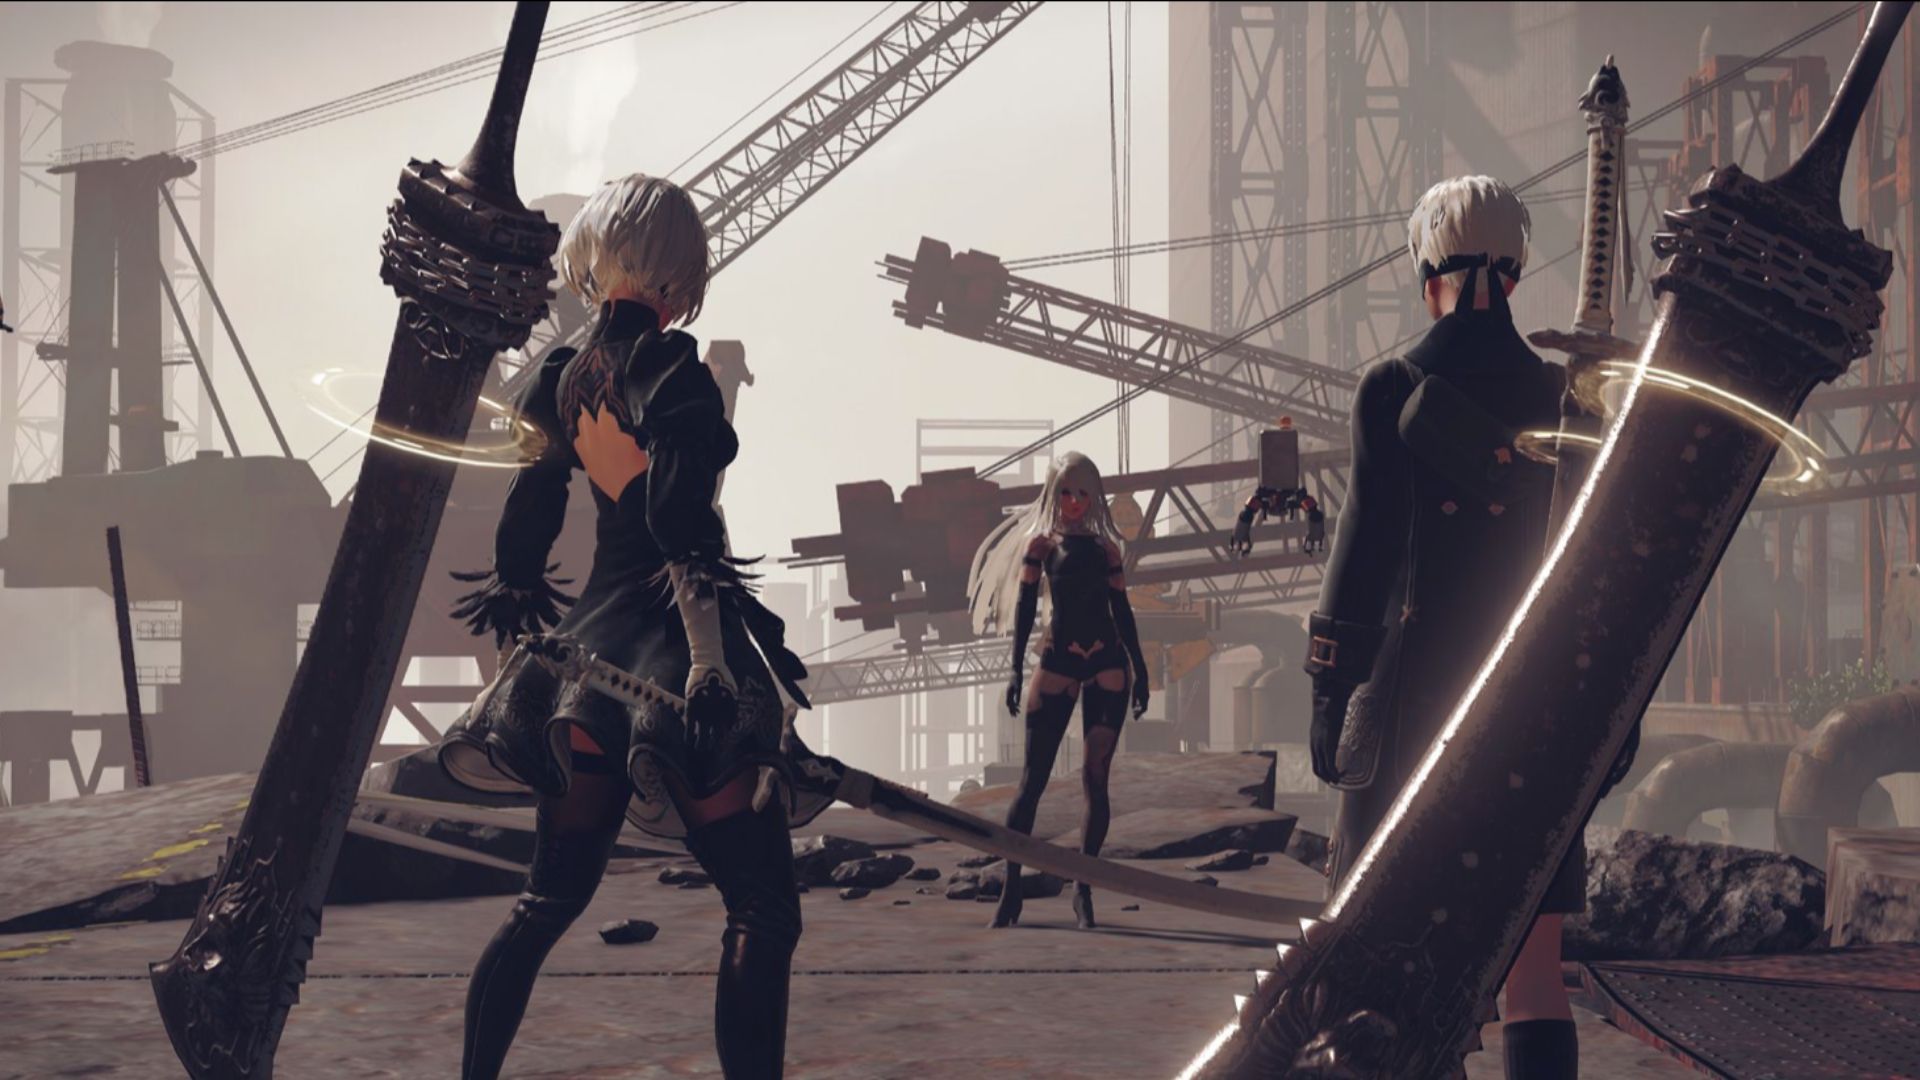 oor tuin Keizer All of the Nier Automata endings and how to get them | Pocket Tactics